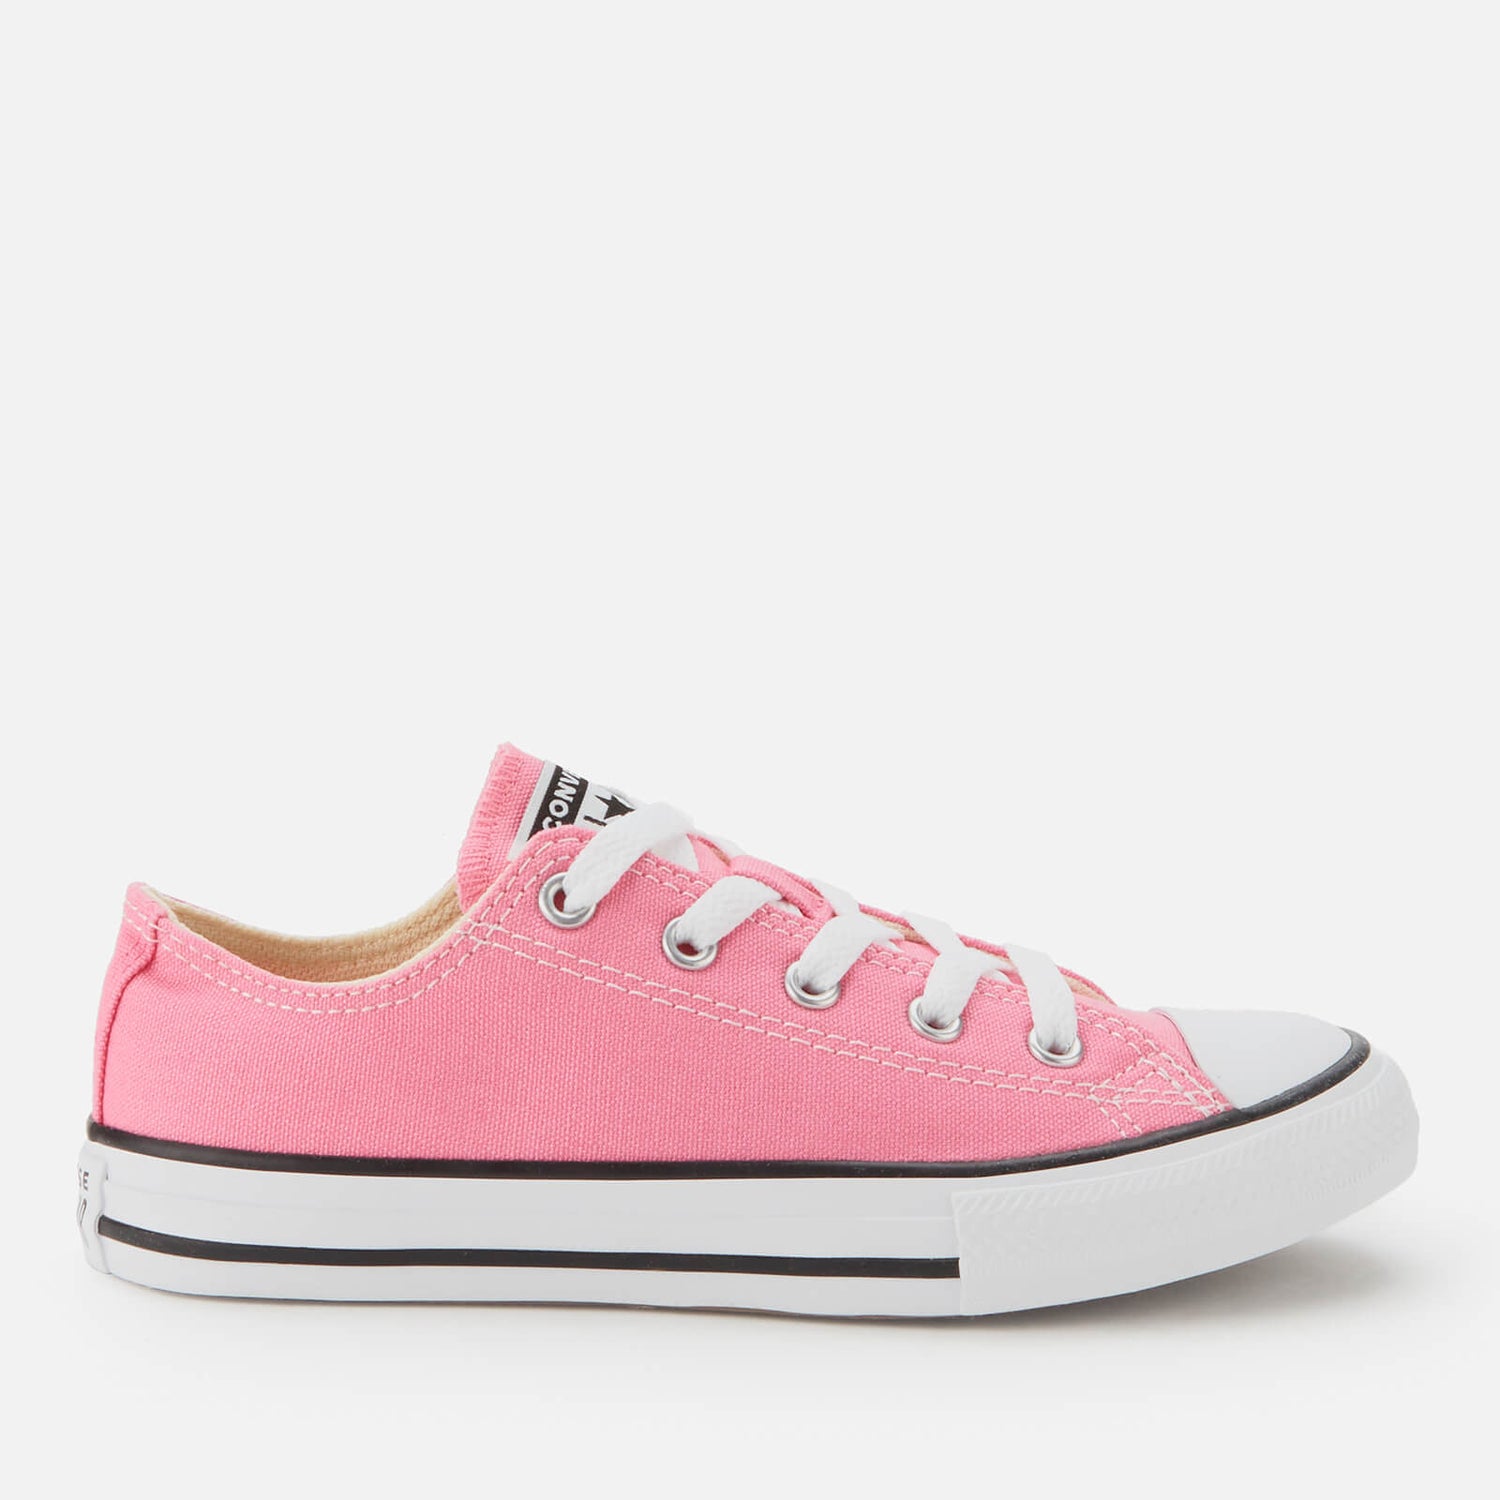 Converse Kids' Chuck Taylor All Star Ox Trainers - Pink